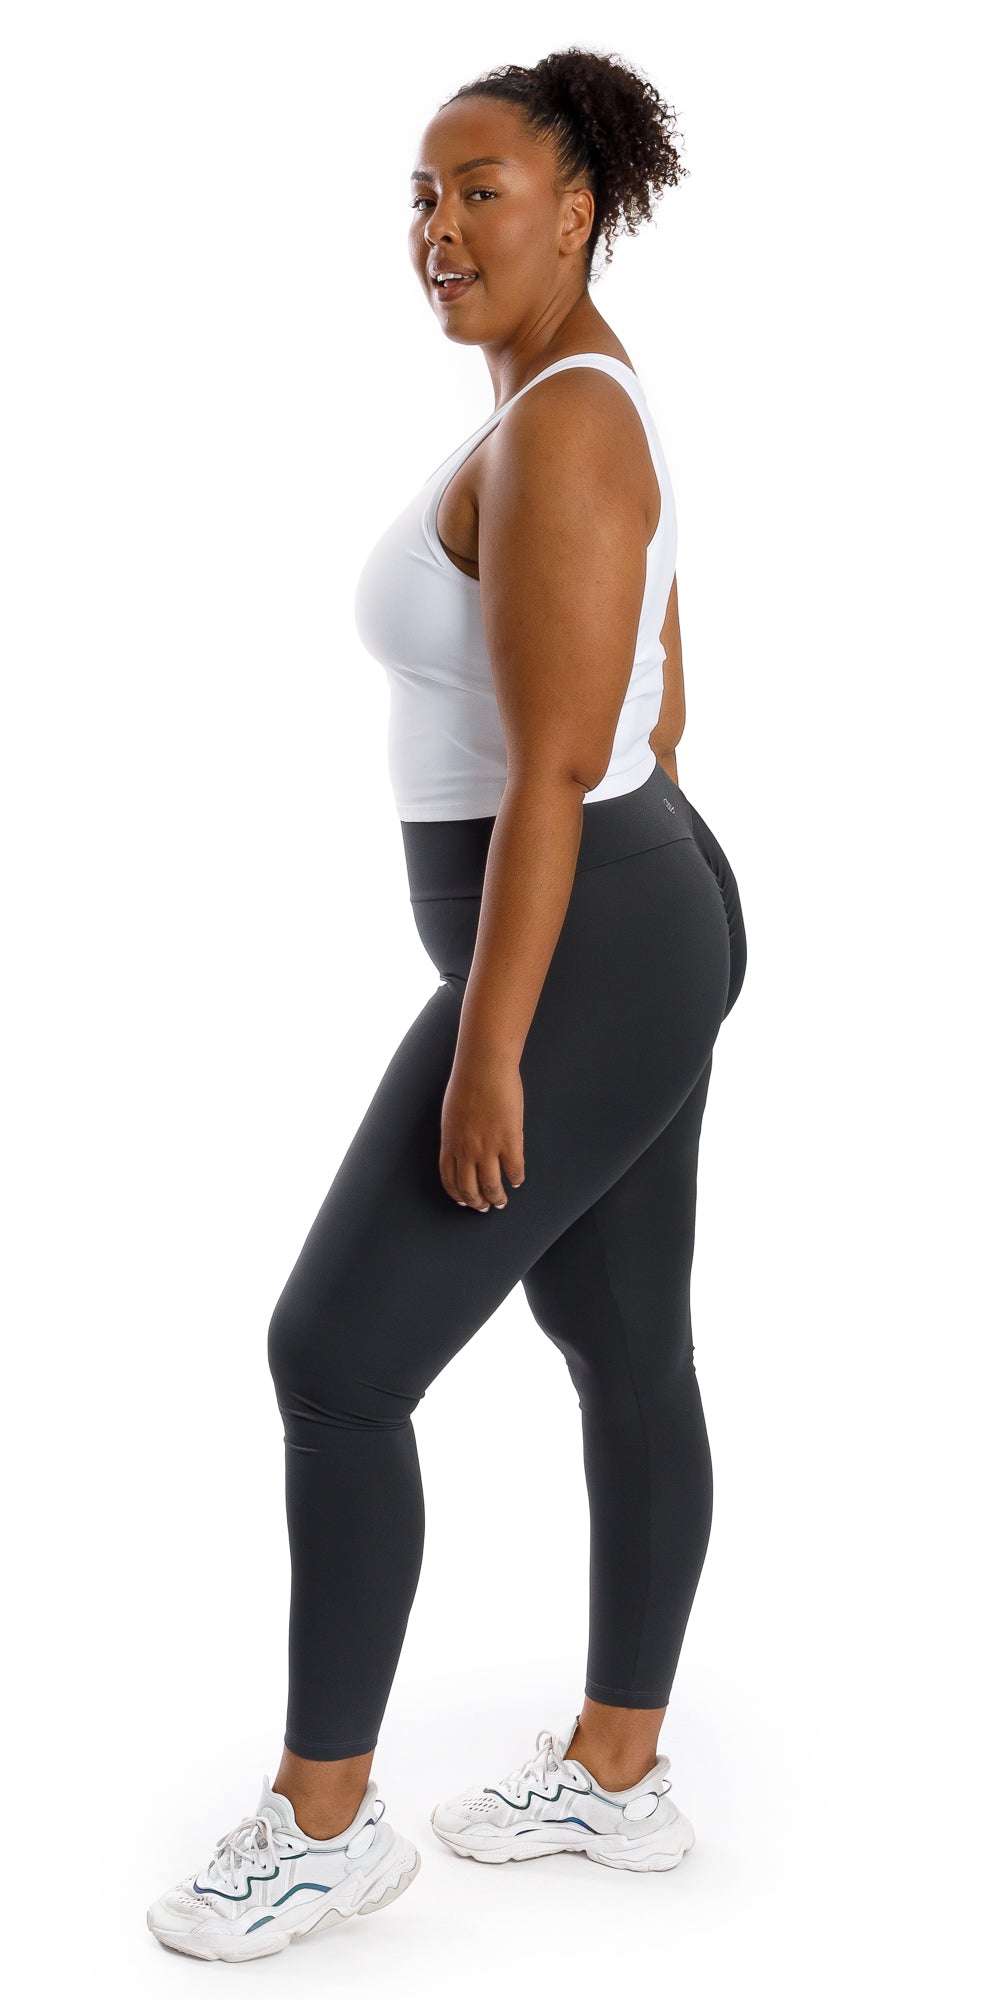 Full body side view of lady in sleeveless White Crop Top and black leggings putting left foot forward and looking to her left